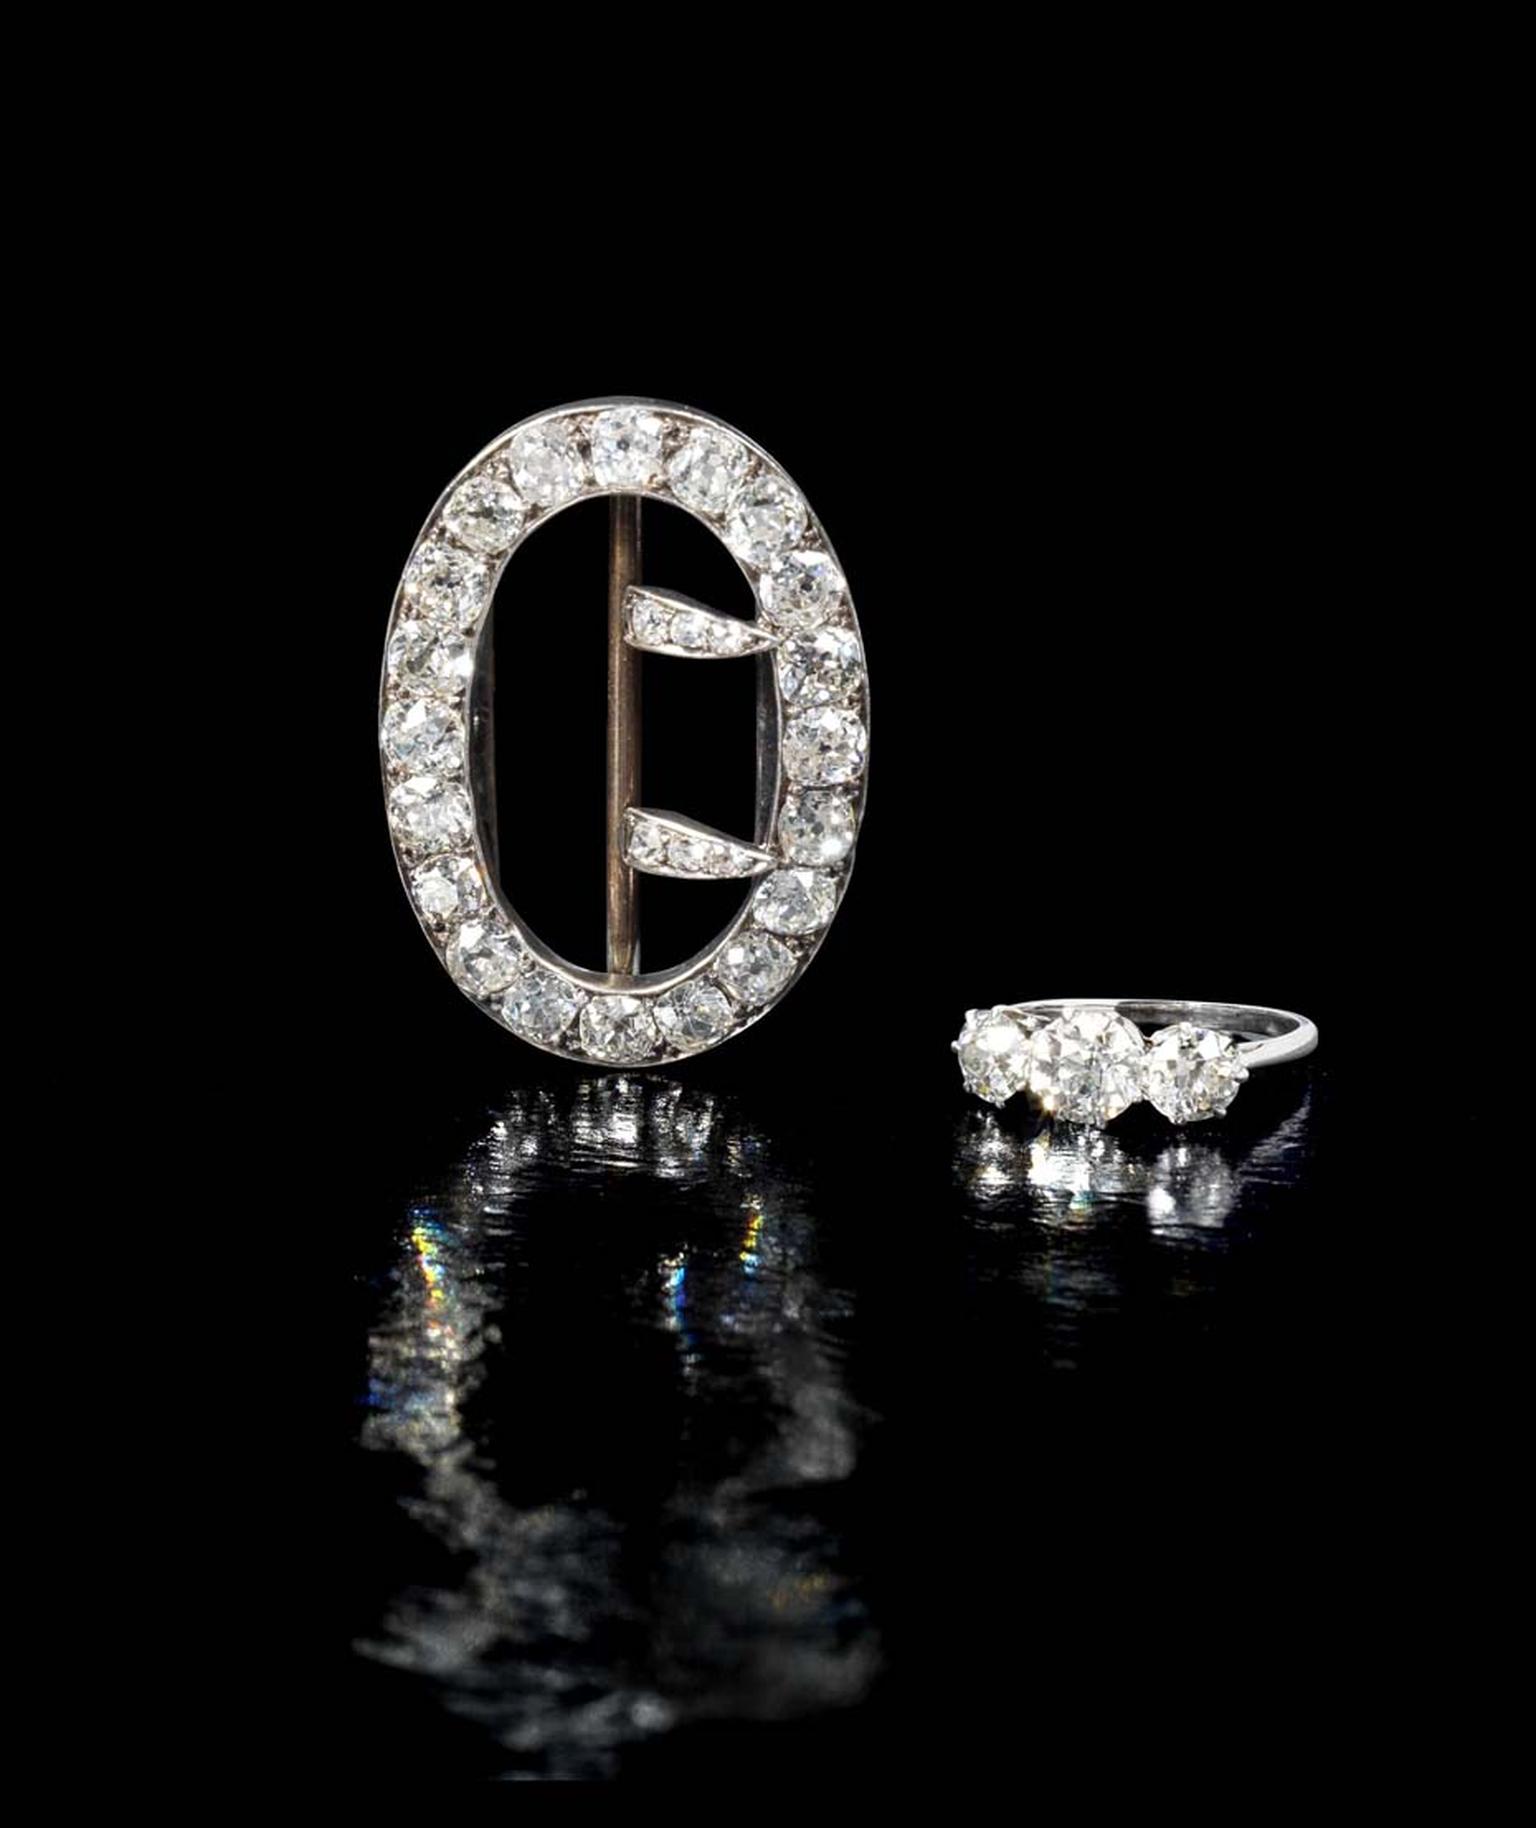 The contents of Agatha Christie's trunk, included a three stone brilliant-cut diamond ring and a diamond brooch in the shape of a buckle, will be auctioned by Bonhams London on 8 October 2014. Bids for the brooch will start at £6,000-8,000 and the ring at